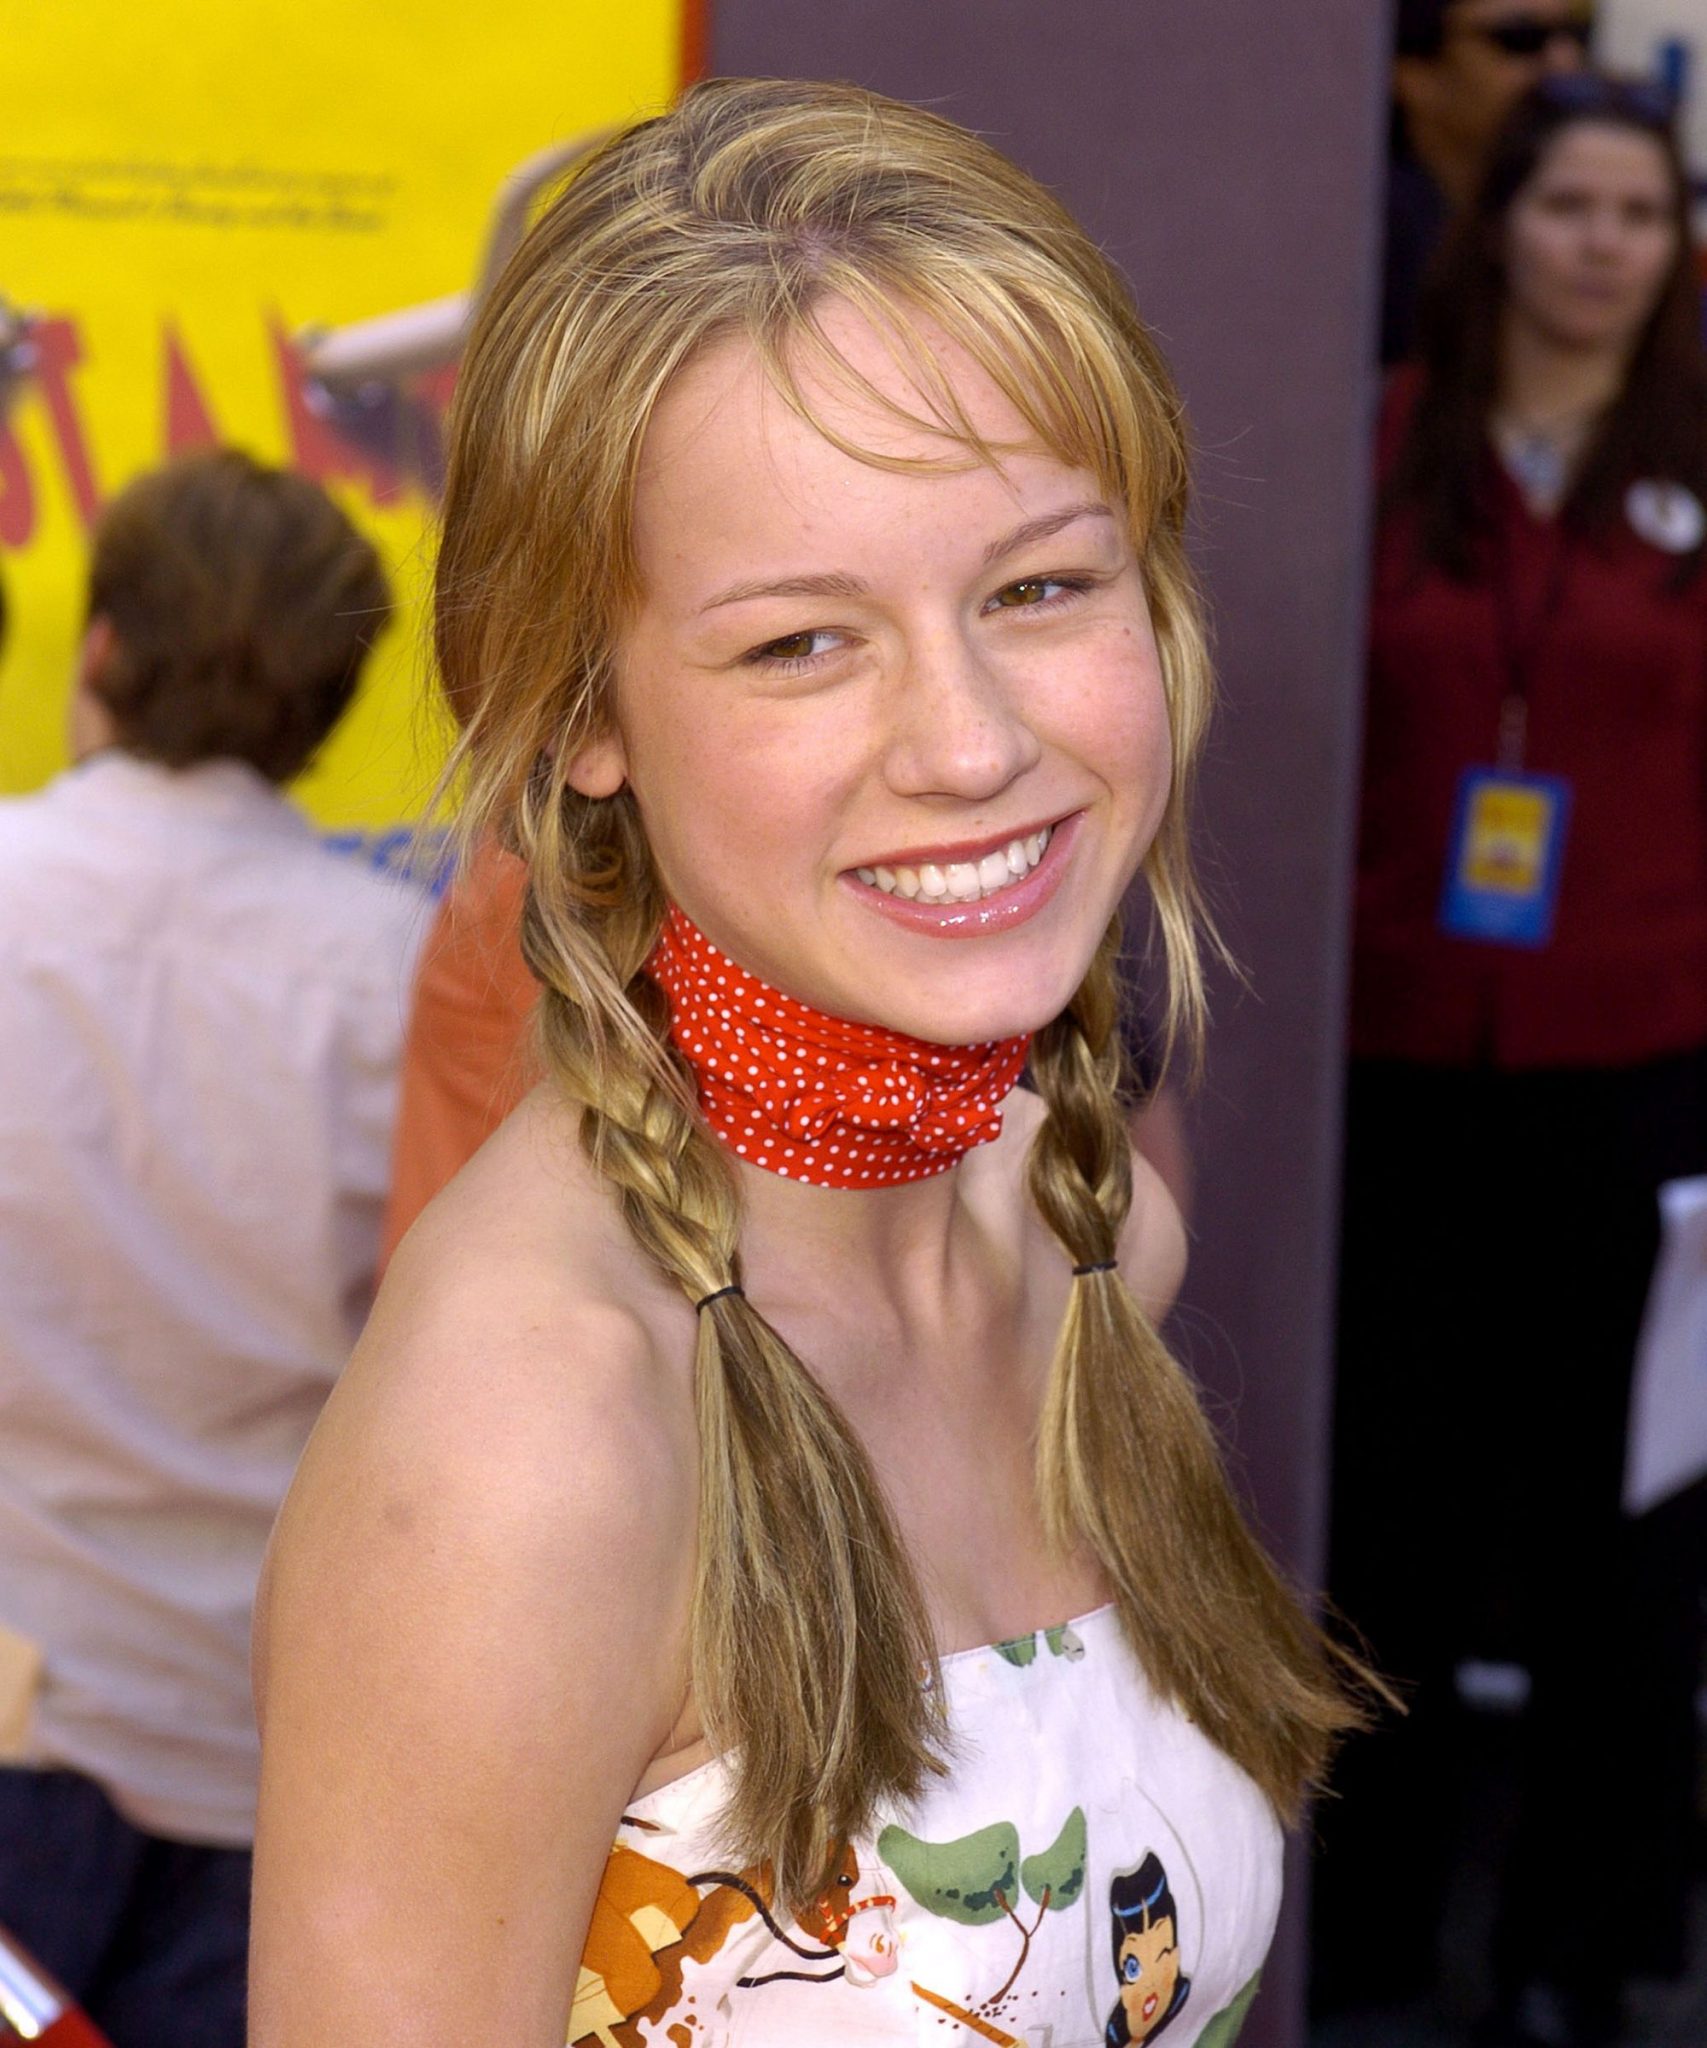 from teen star to captain marvel: brie larson’s glow-up is a can’t-miss